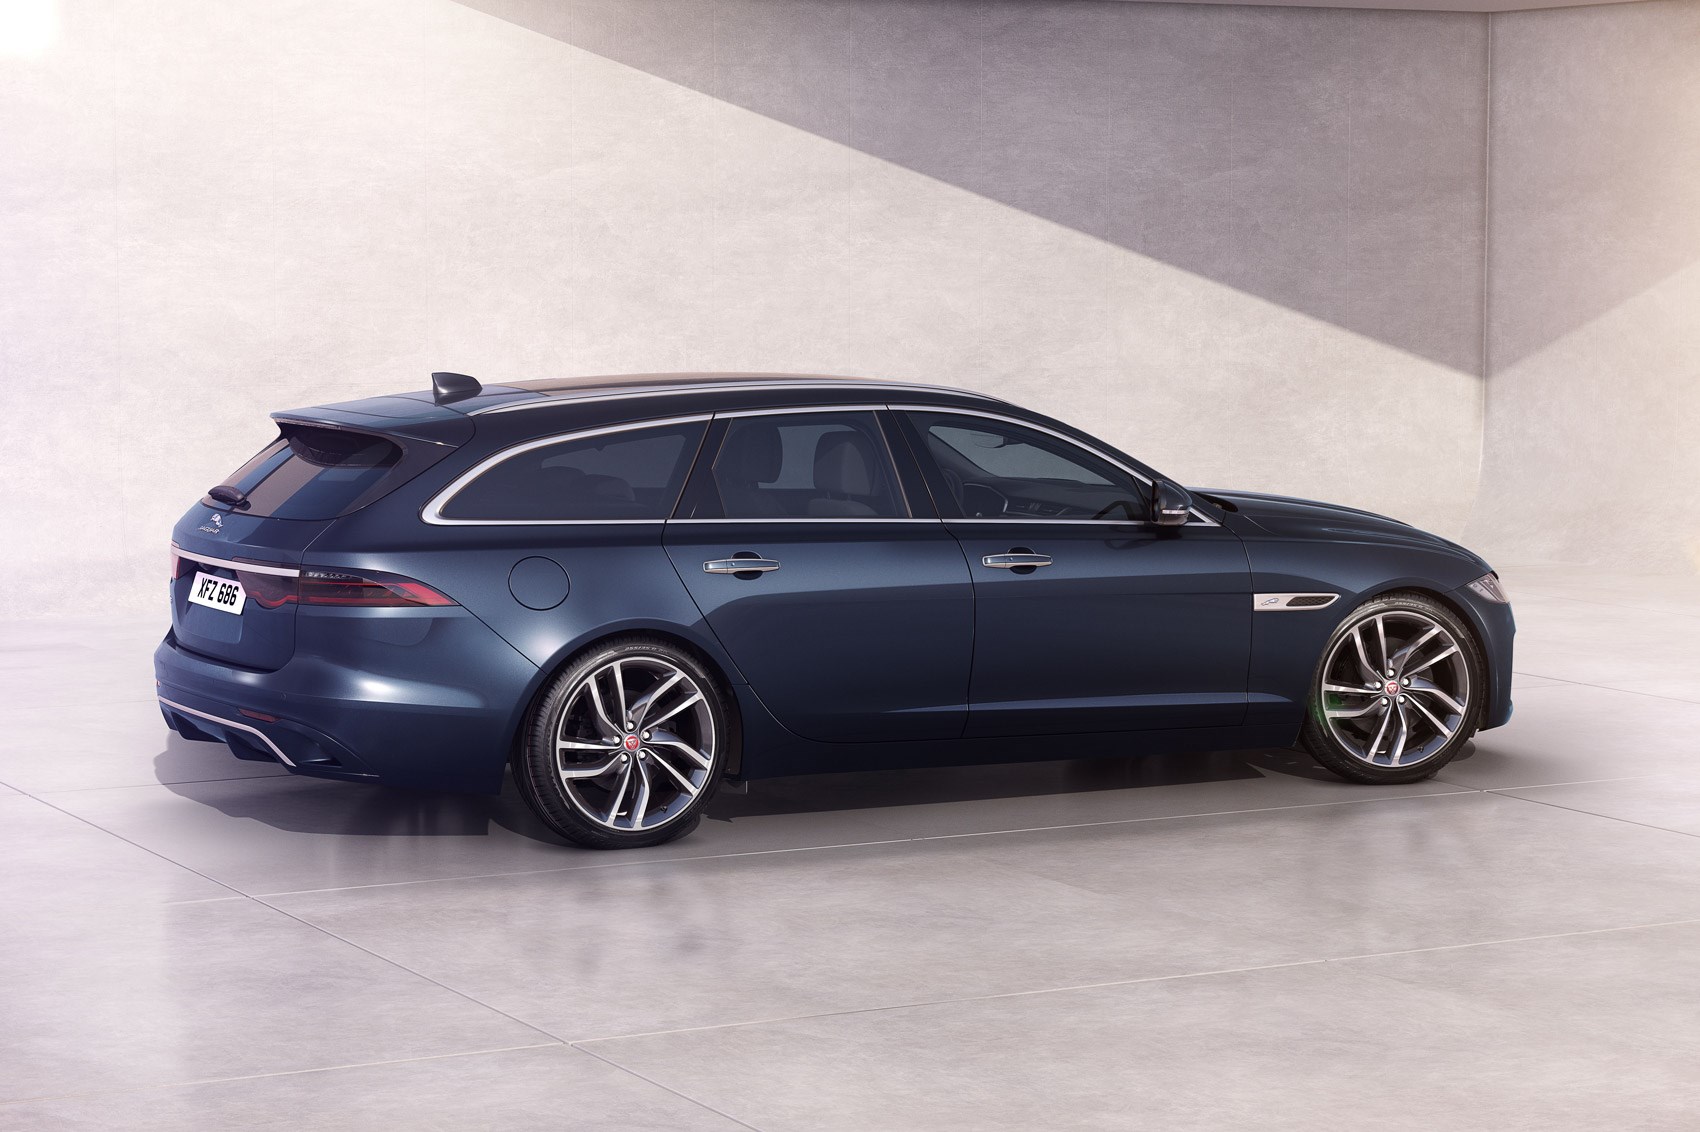 New-look Jaguar XF saloon and Sportbrake arrives with lower entry price